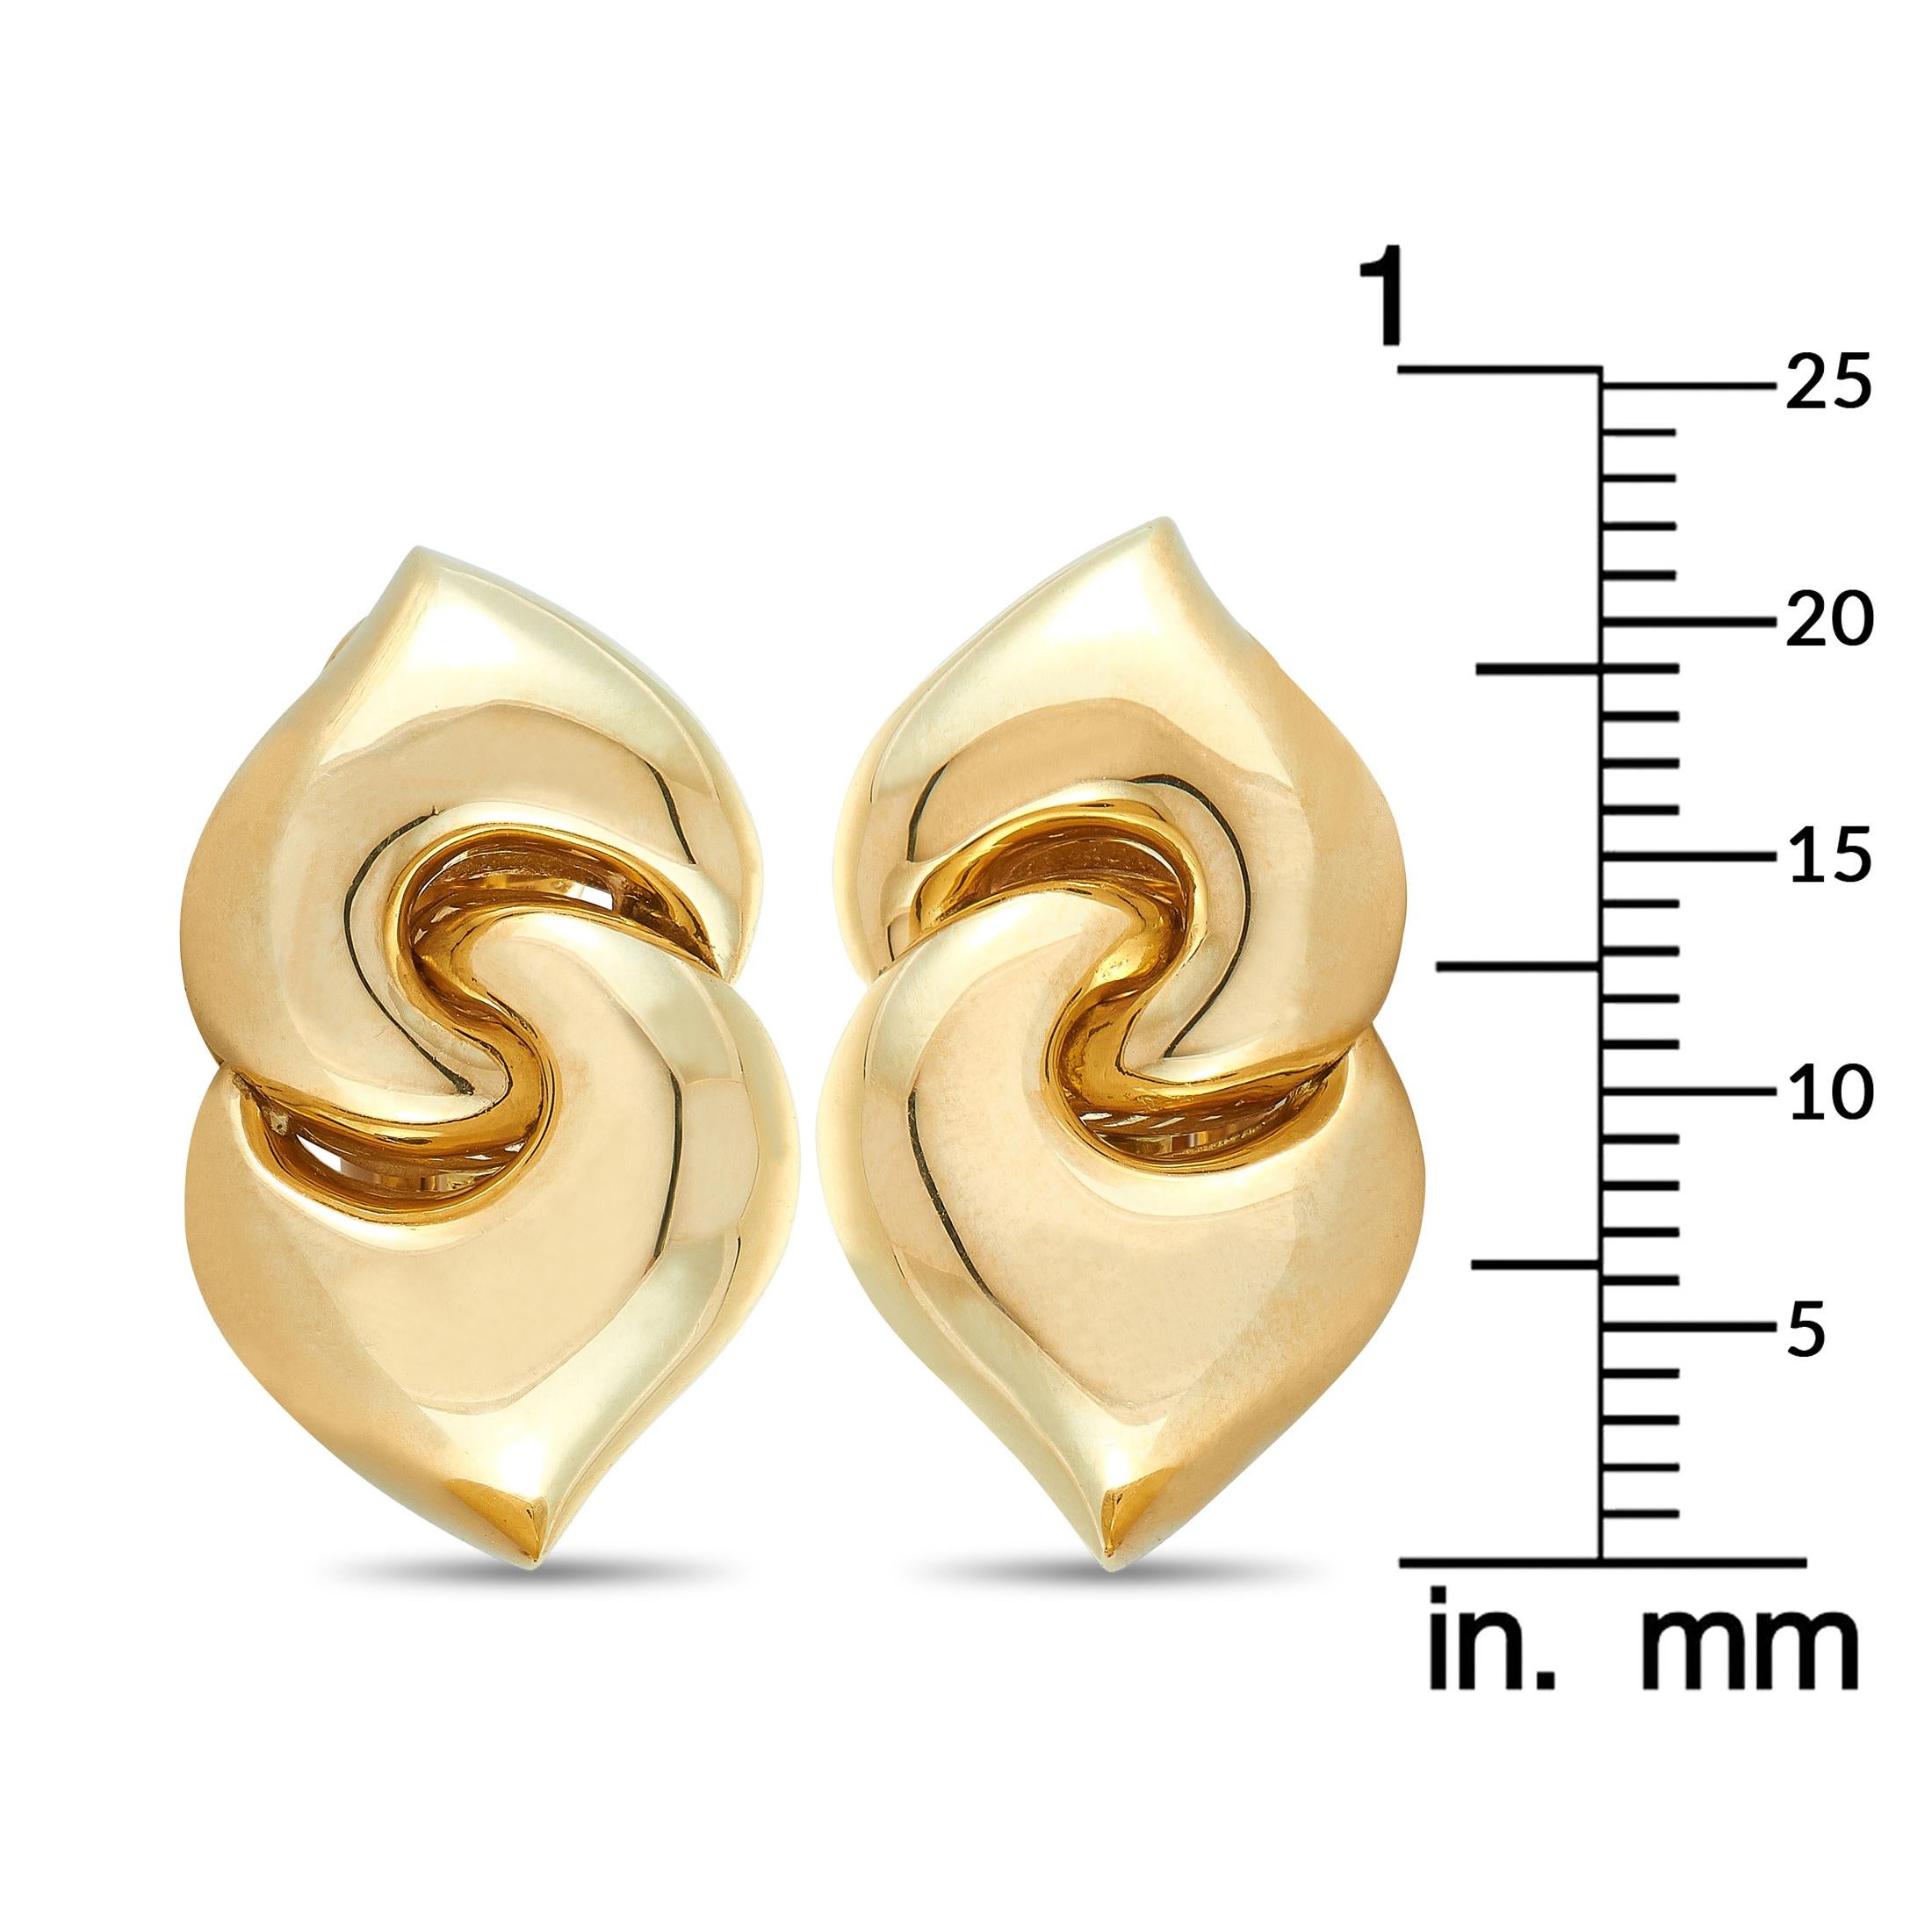 These Bvlgari earrings are crafted from 18K yellow gold and each of the two weighs 7.5 grams, measuring 0.87” in length and 0.50” in width.

The earrings are offered in estate condition and include the manufacturer’s box.